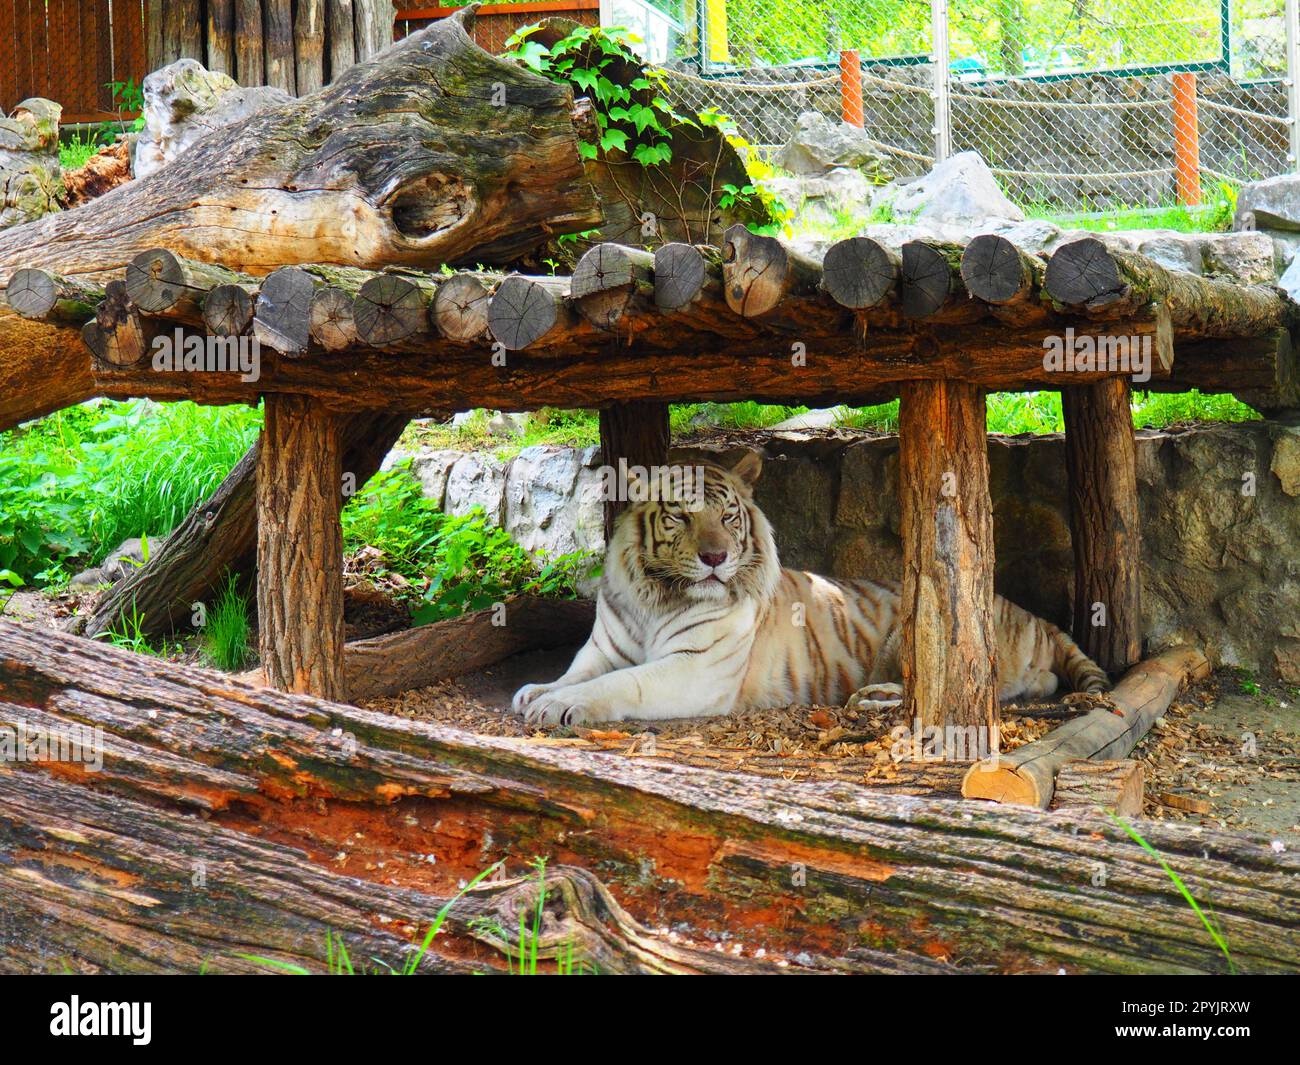 Bengal tiger, Panthera tigris tigris or Panthera tigris bengalensis. Albino mutation - white tiger. The animal is resting in the zoo. The tiger holds its head proudly. Portrait of a Royal Bengal tiger Stock Photo